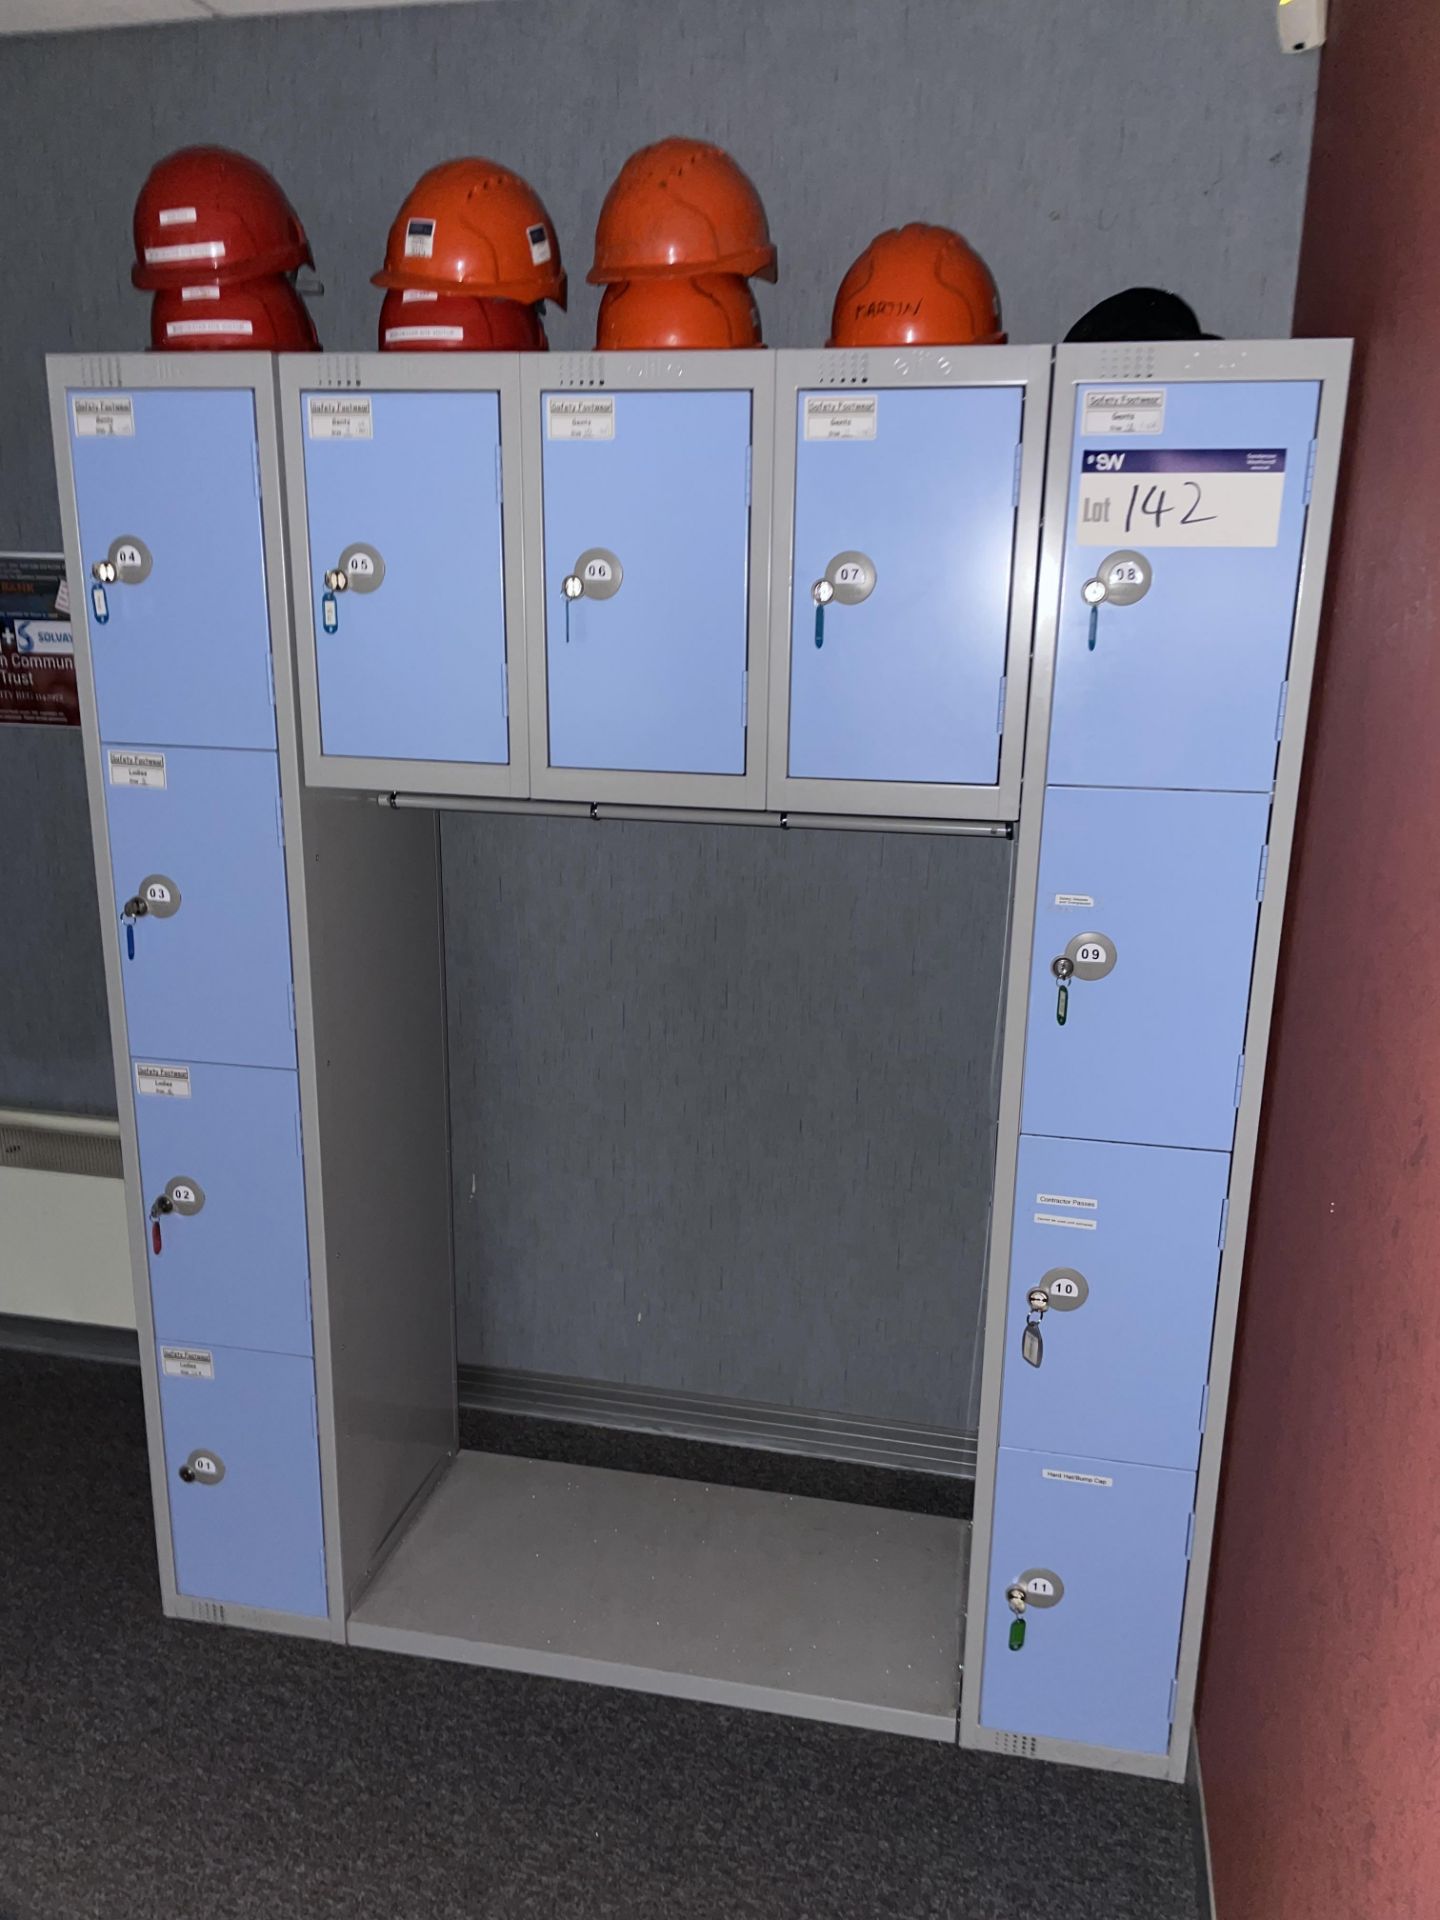 Elite Personnel Lockers, with safety hats